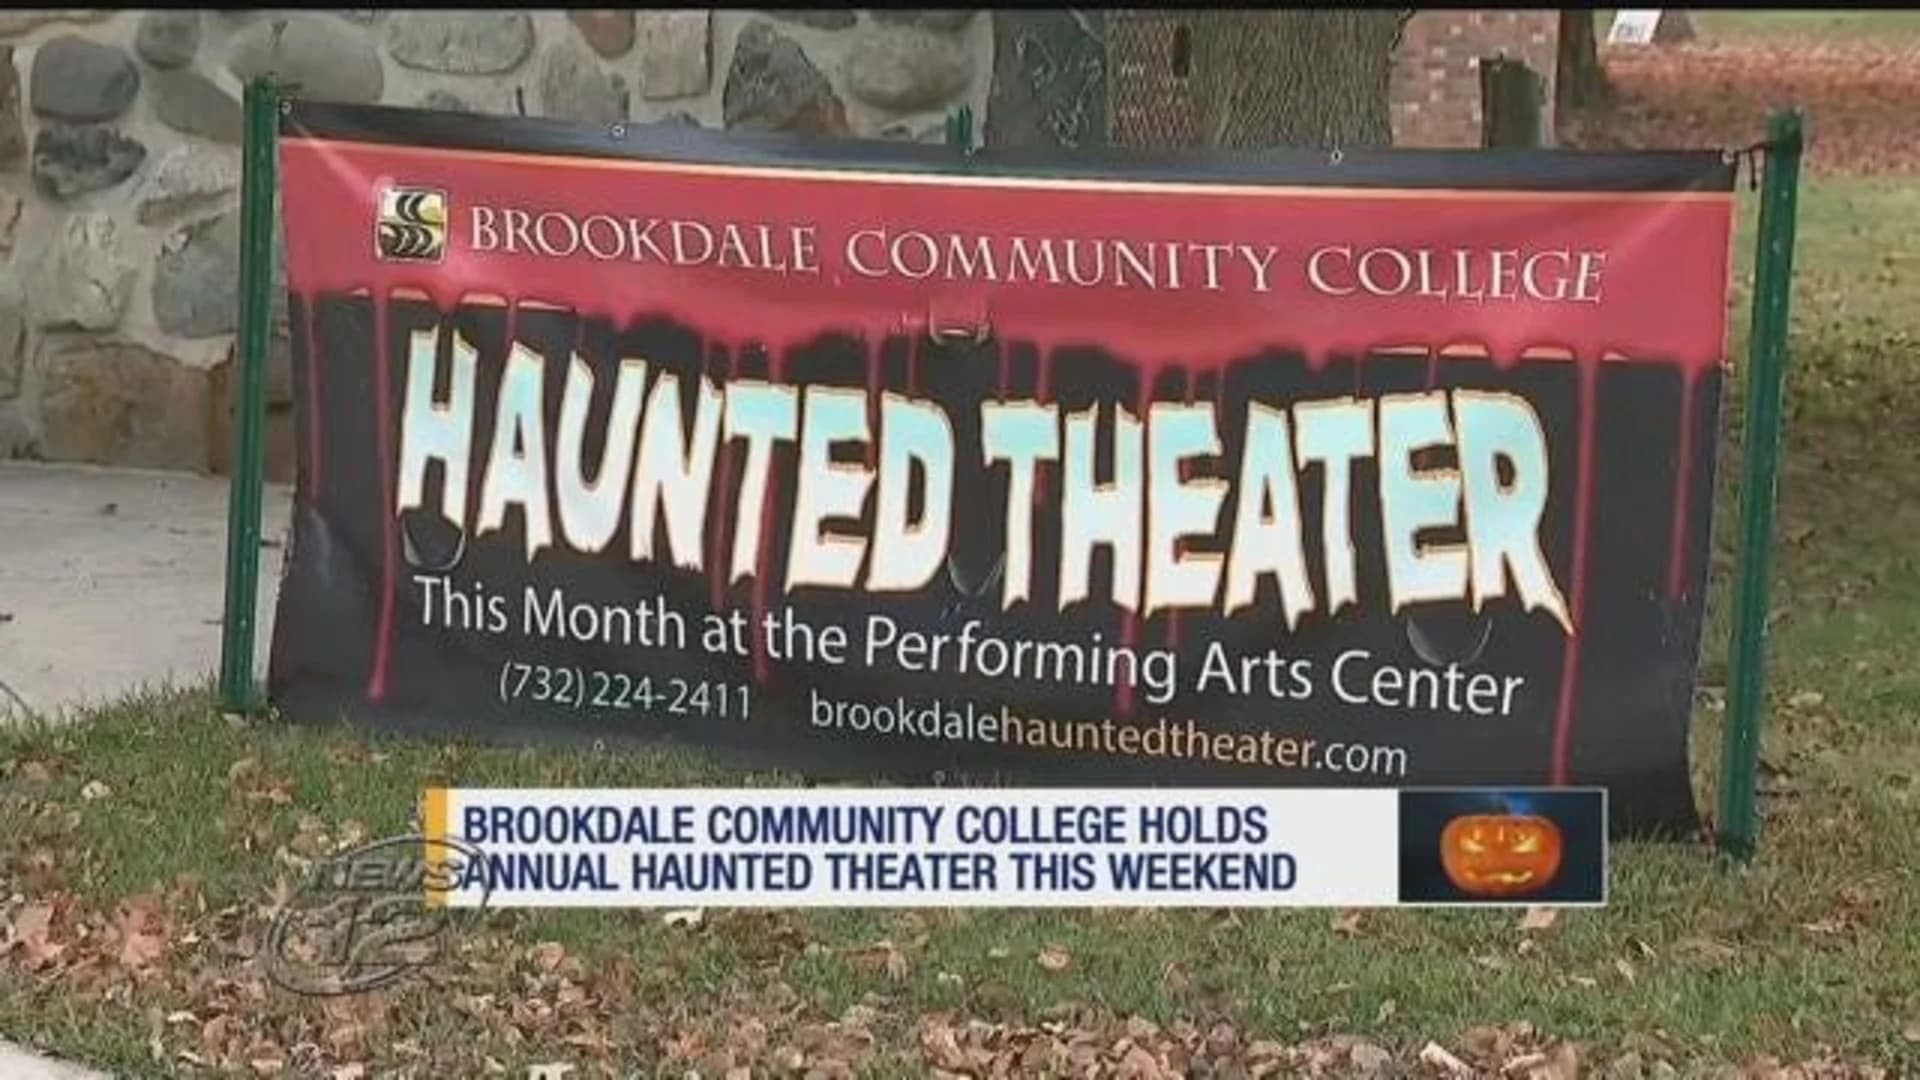 Brookdale Community College to hold annual haunted theater